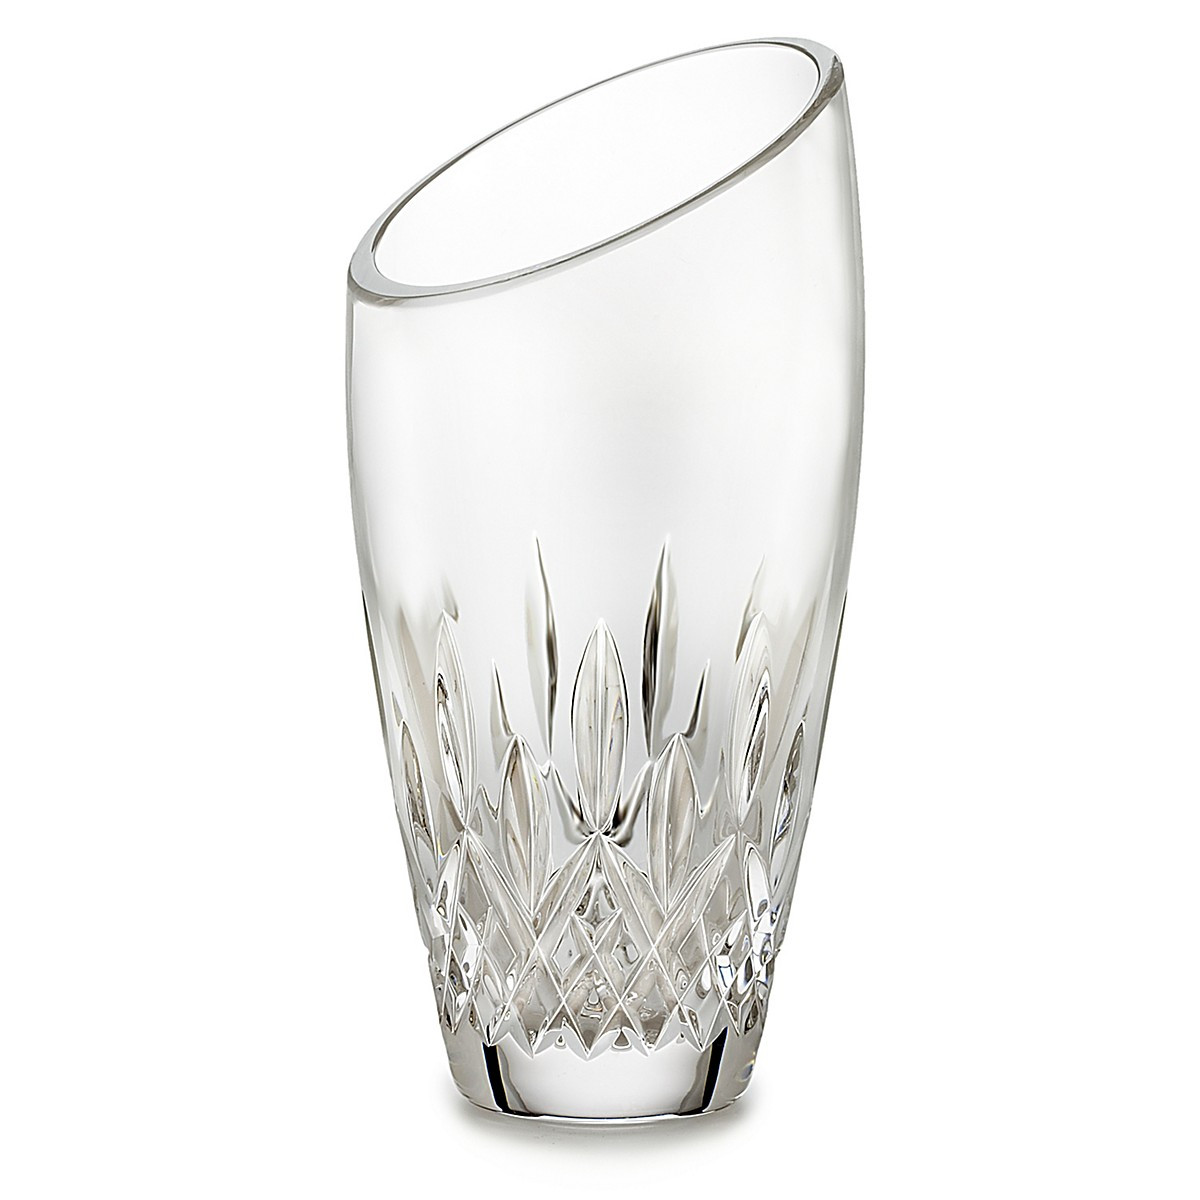 12 attractive Macys Crystal Vase 2024 free download macys crystal vase of waterford crystal vase patterns www topsimages com within vases design pictures waterford lismore vase crystal in essence angled round the next generation jpg 1200x1200